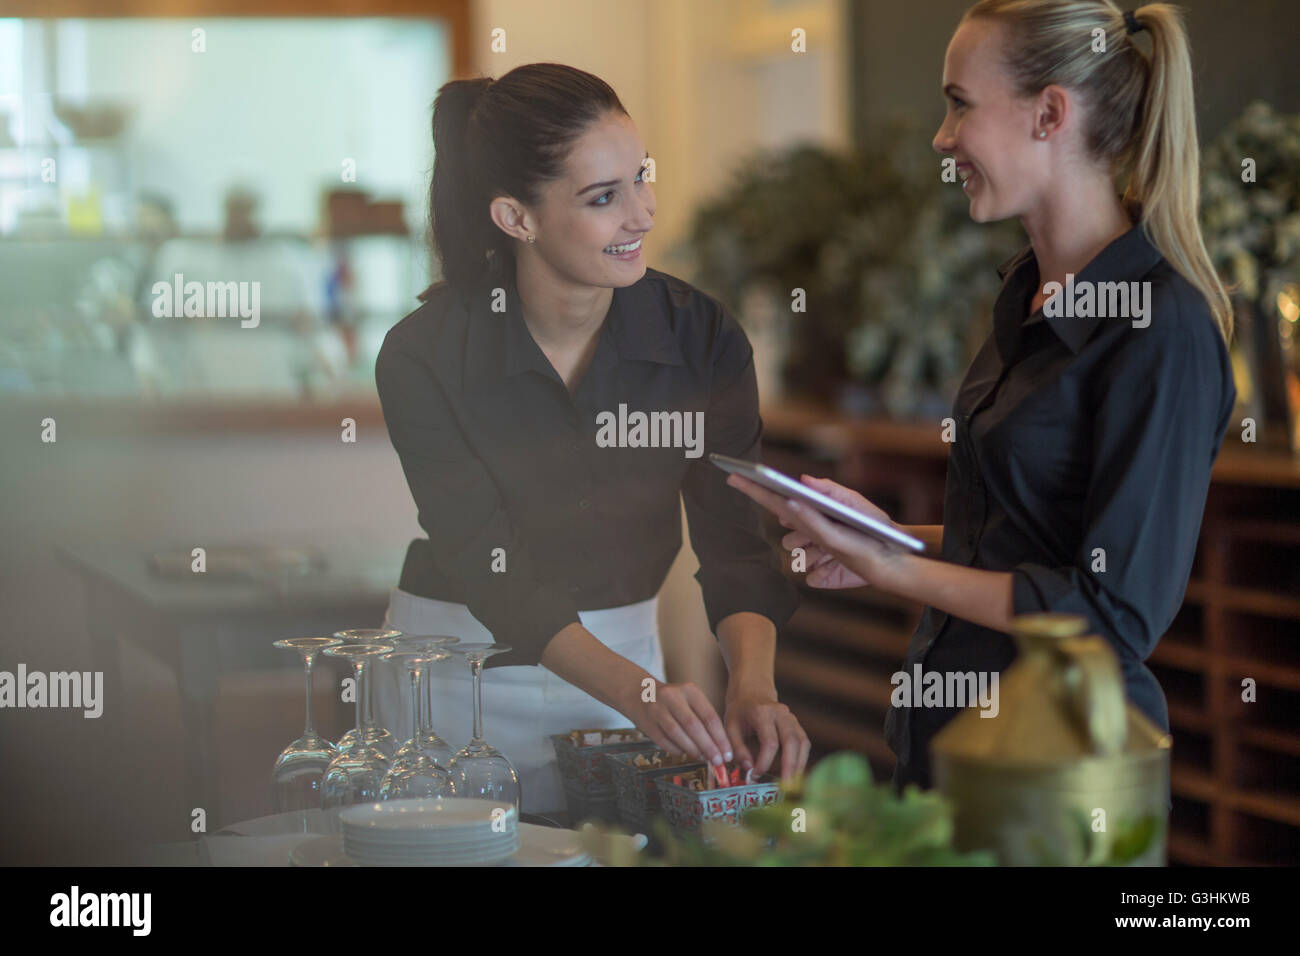 Waitresses chatting and setting table in restaurant Stock Photo